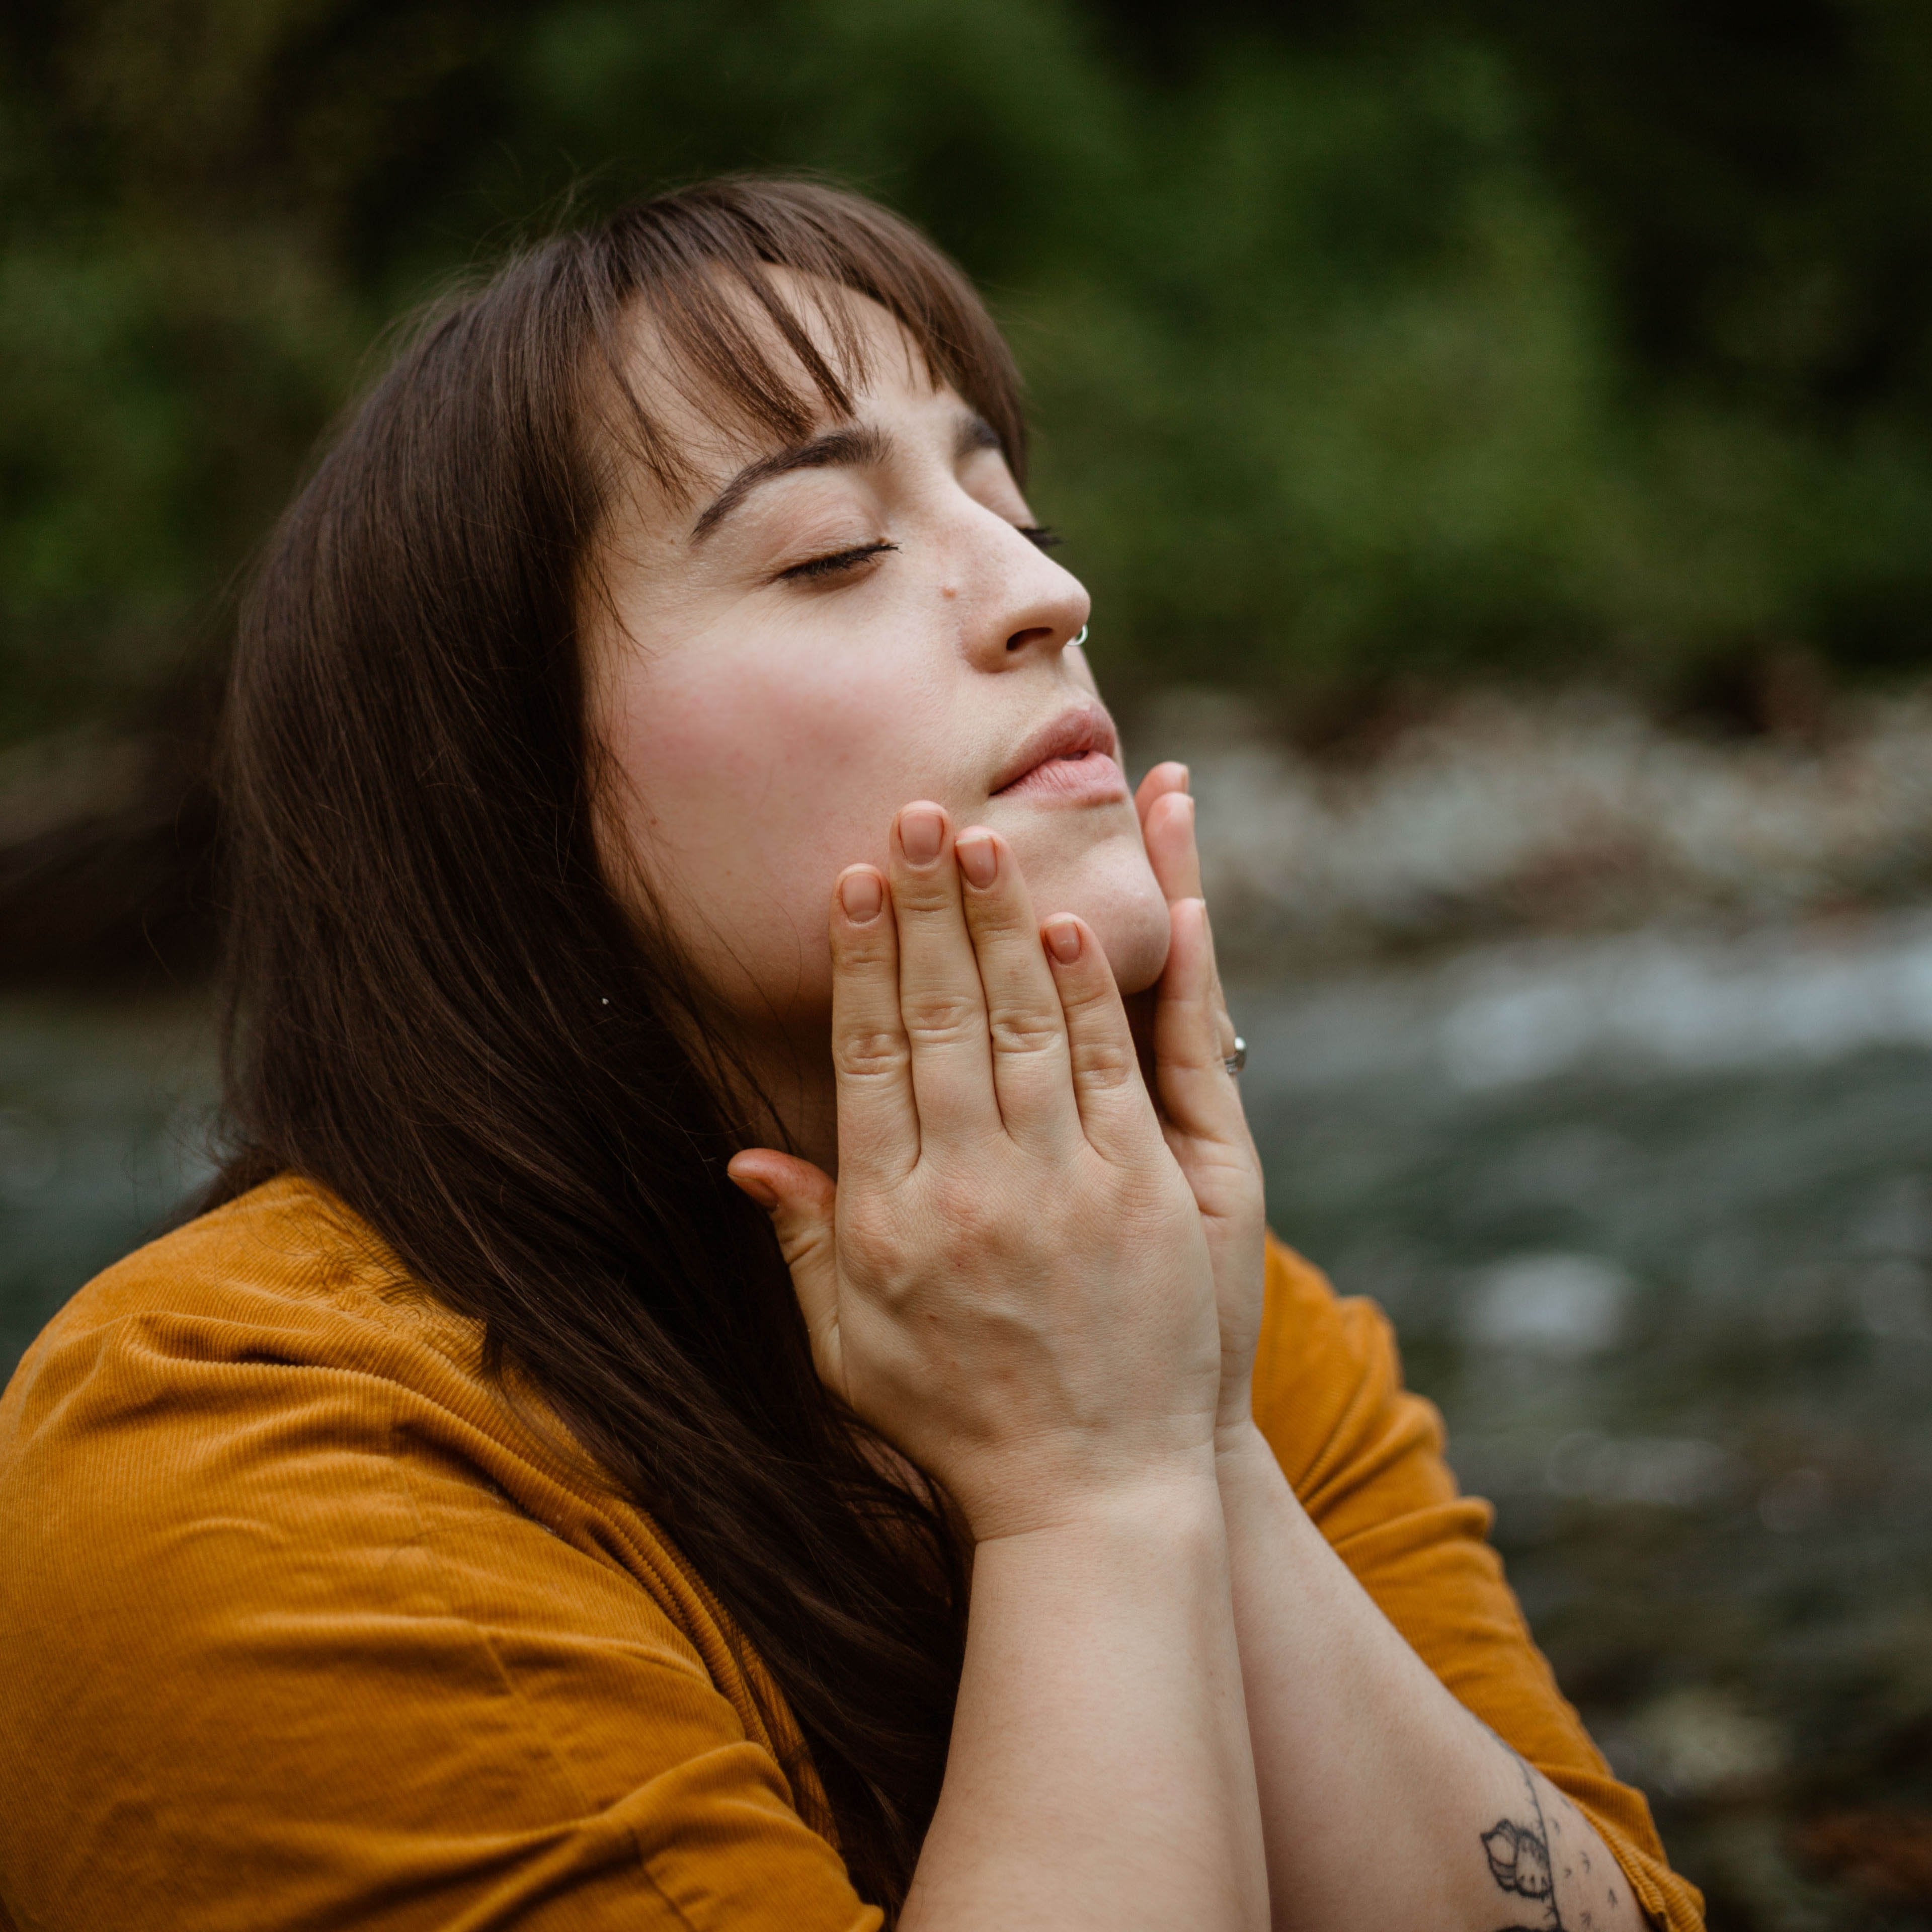 A woman with long brown hair wearing a mustard yellow shirt is outside near a forested stream. Her eyes are closed and she is pressing her hands to her face as though applying a skincare product.